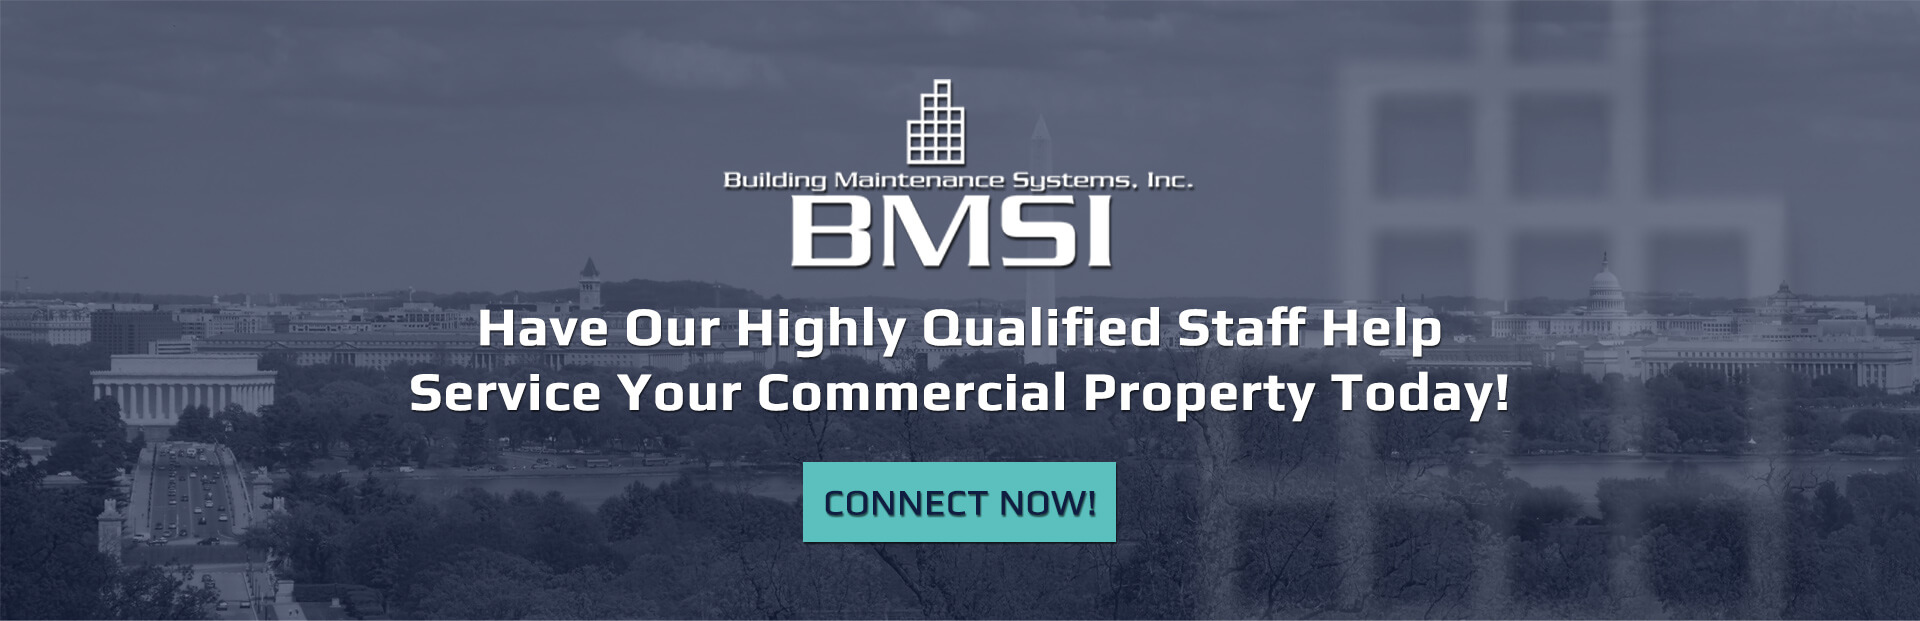 bmsi service your property slider